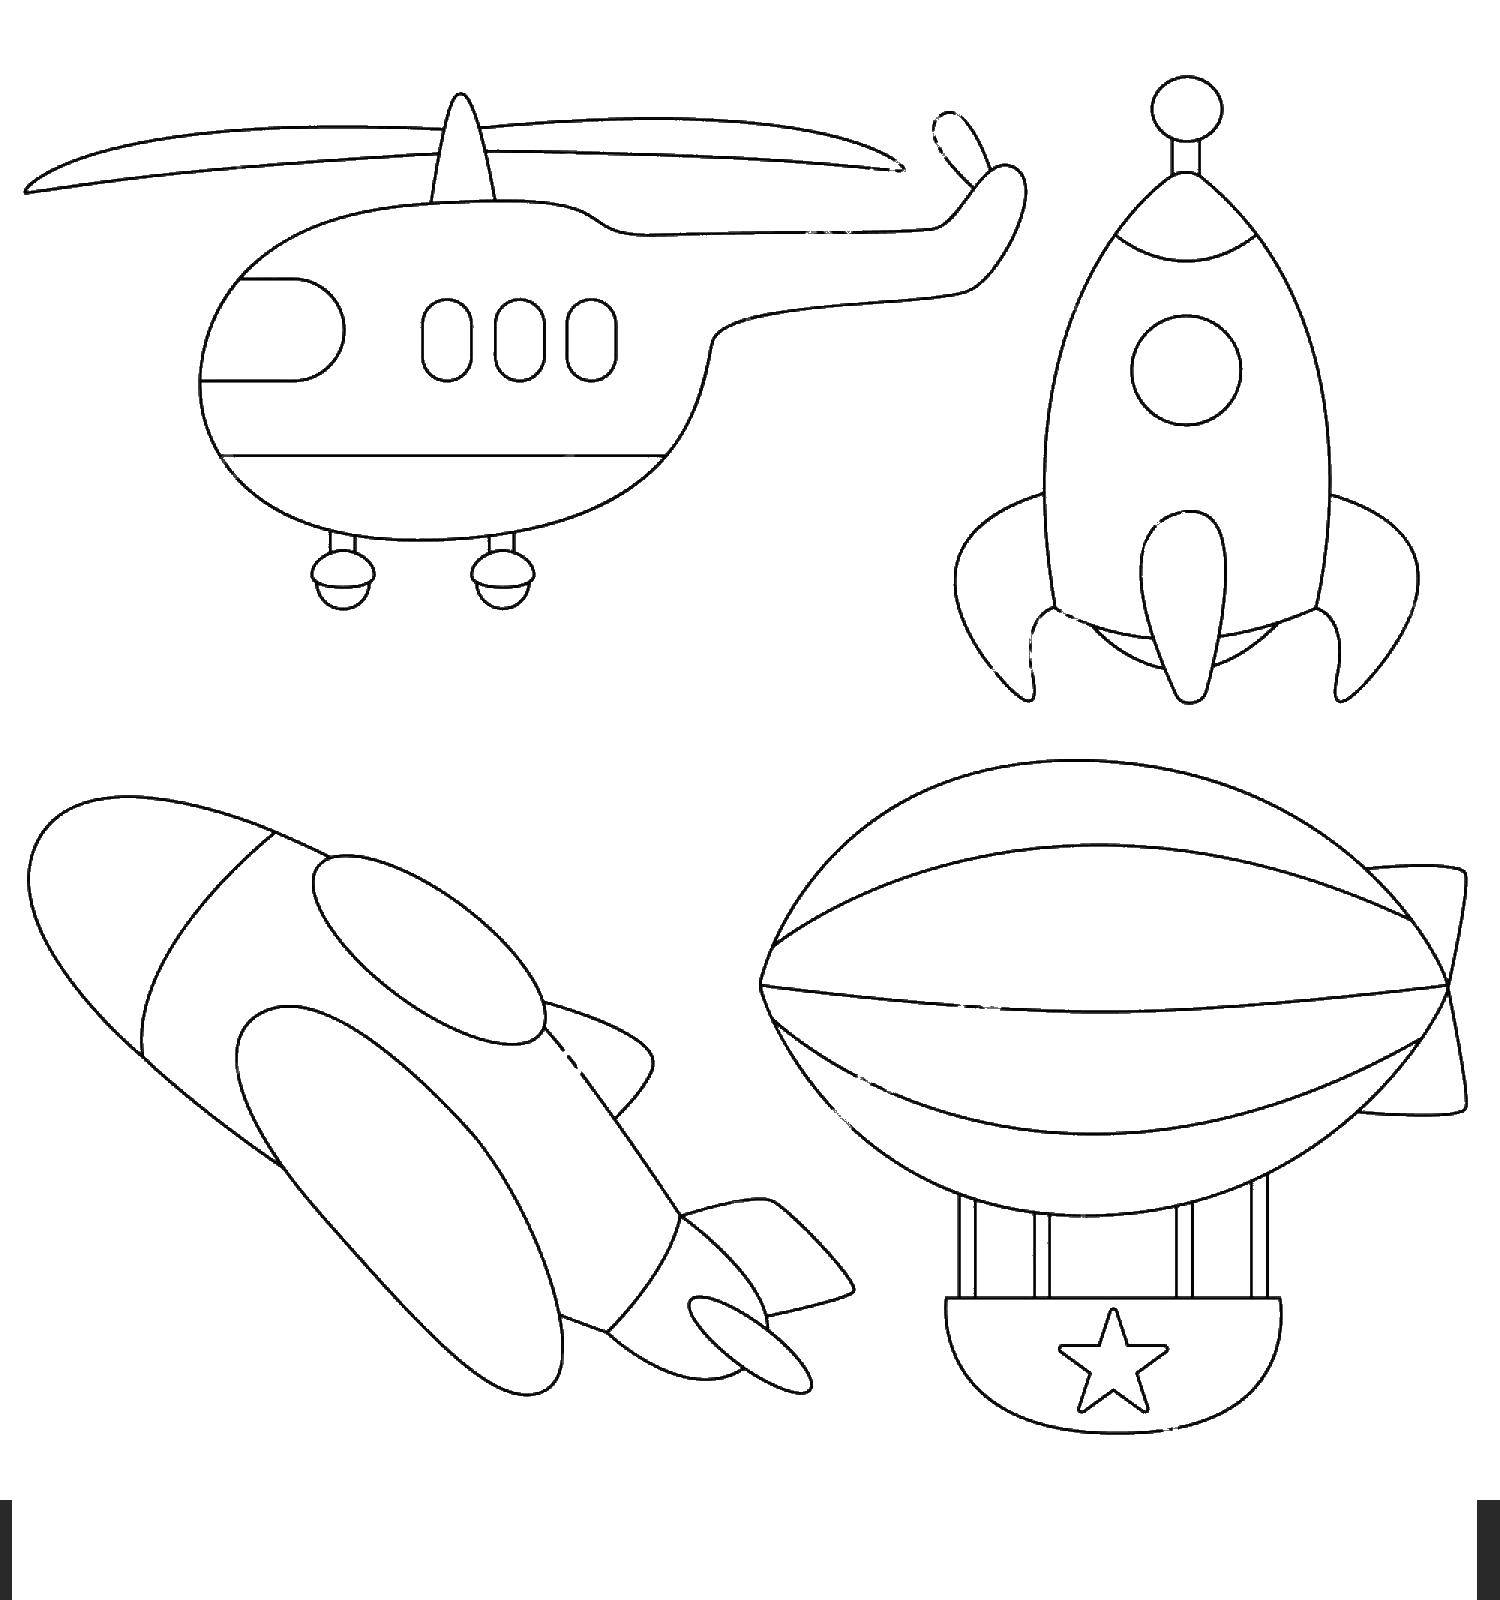 Coloring Aircraft. Category The planes. Tags:  plane.